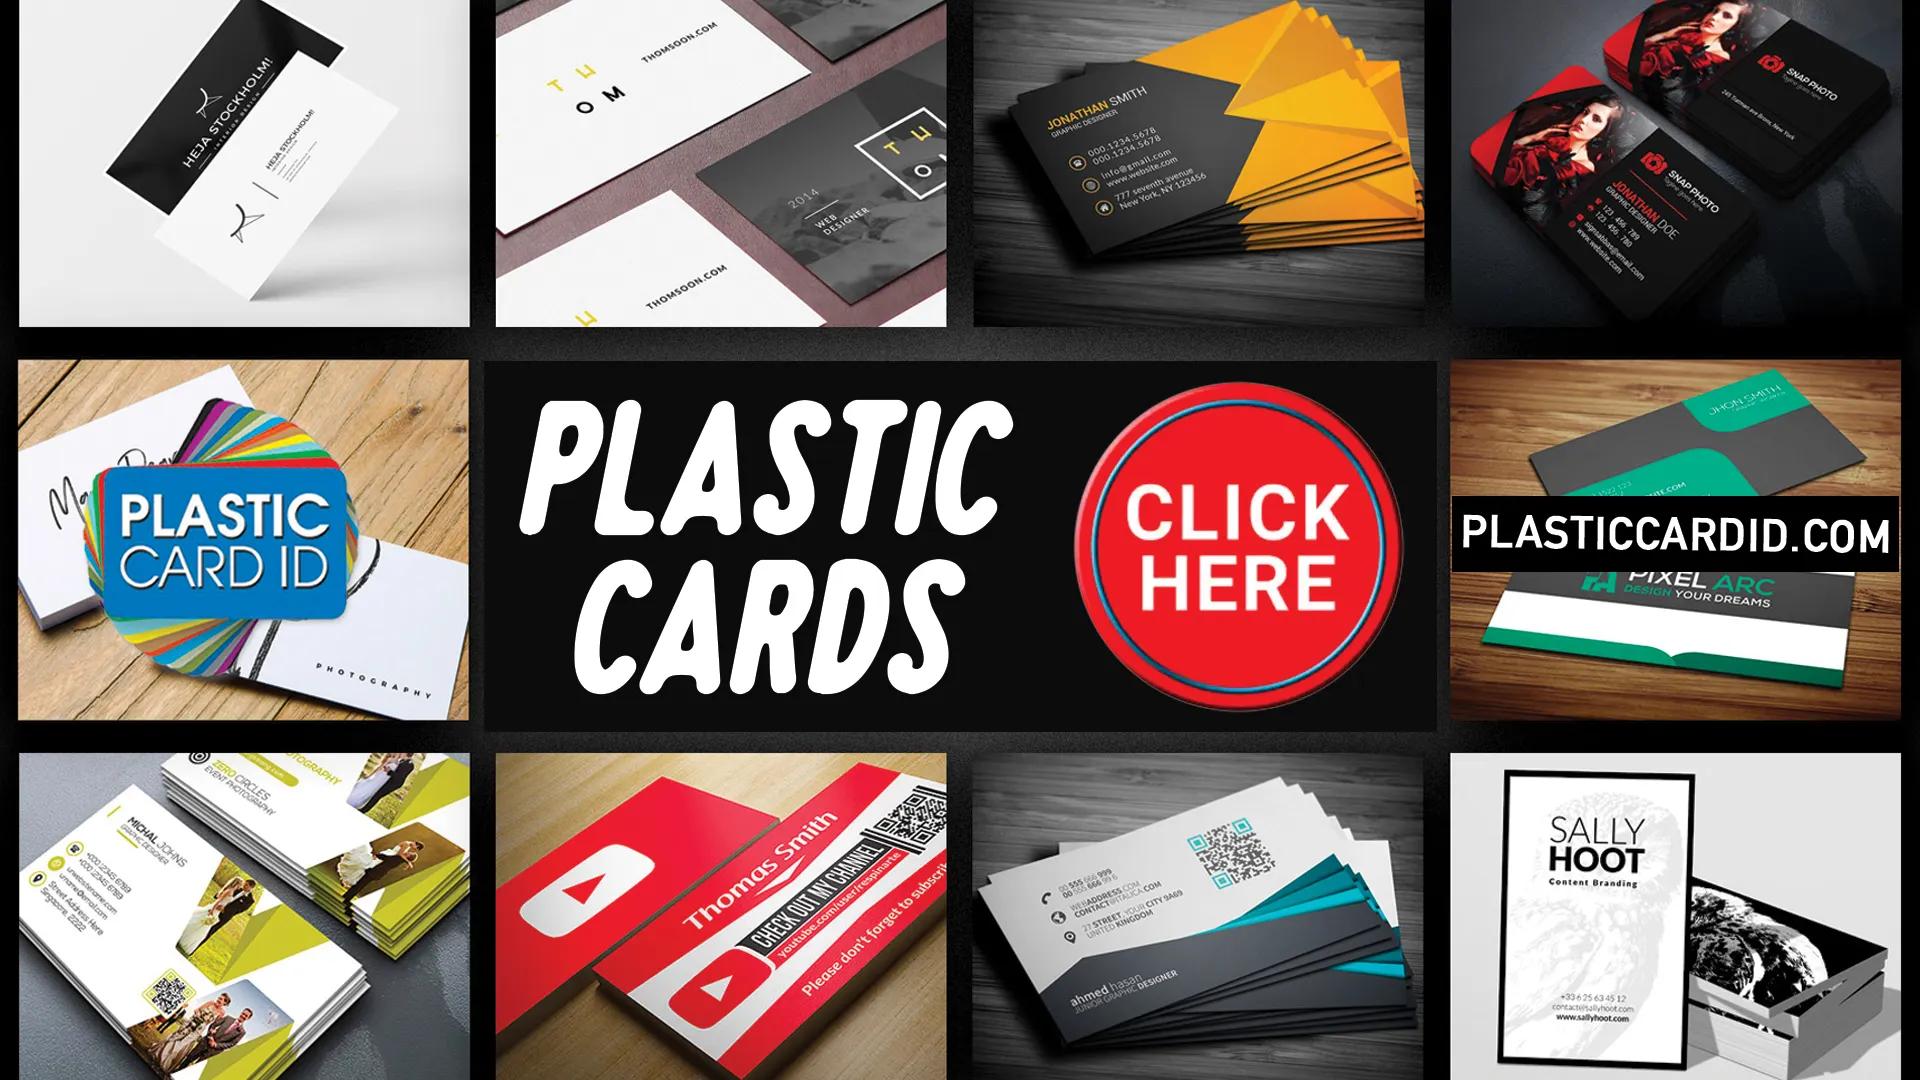 Welcome to the Forefront of Plastic Card Security Enhancements